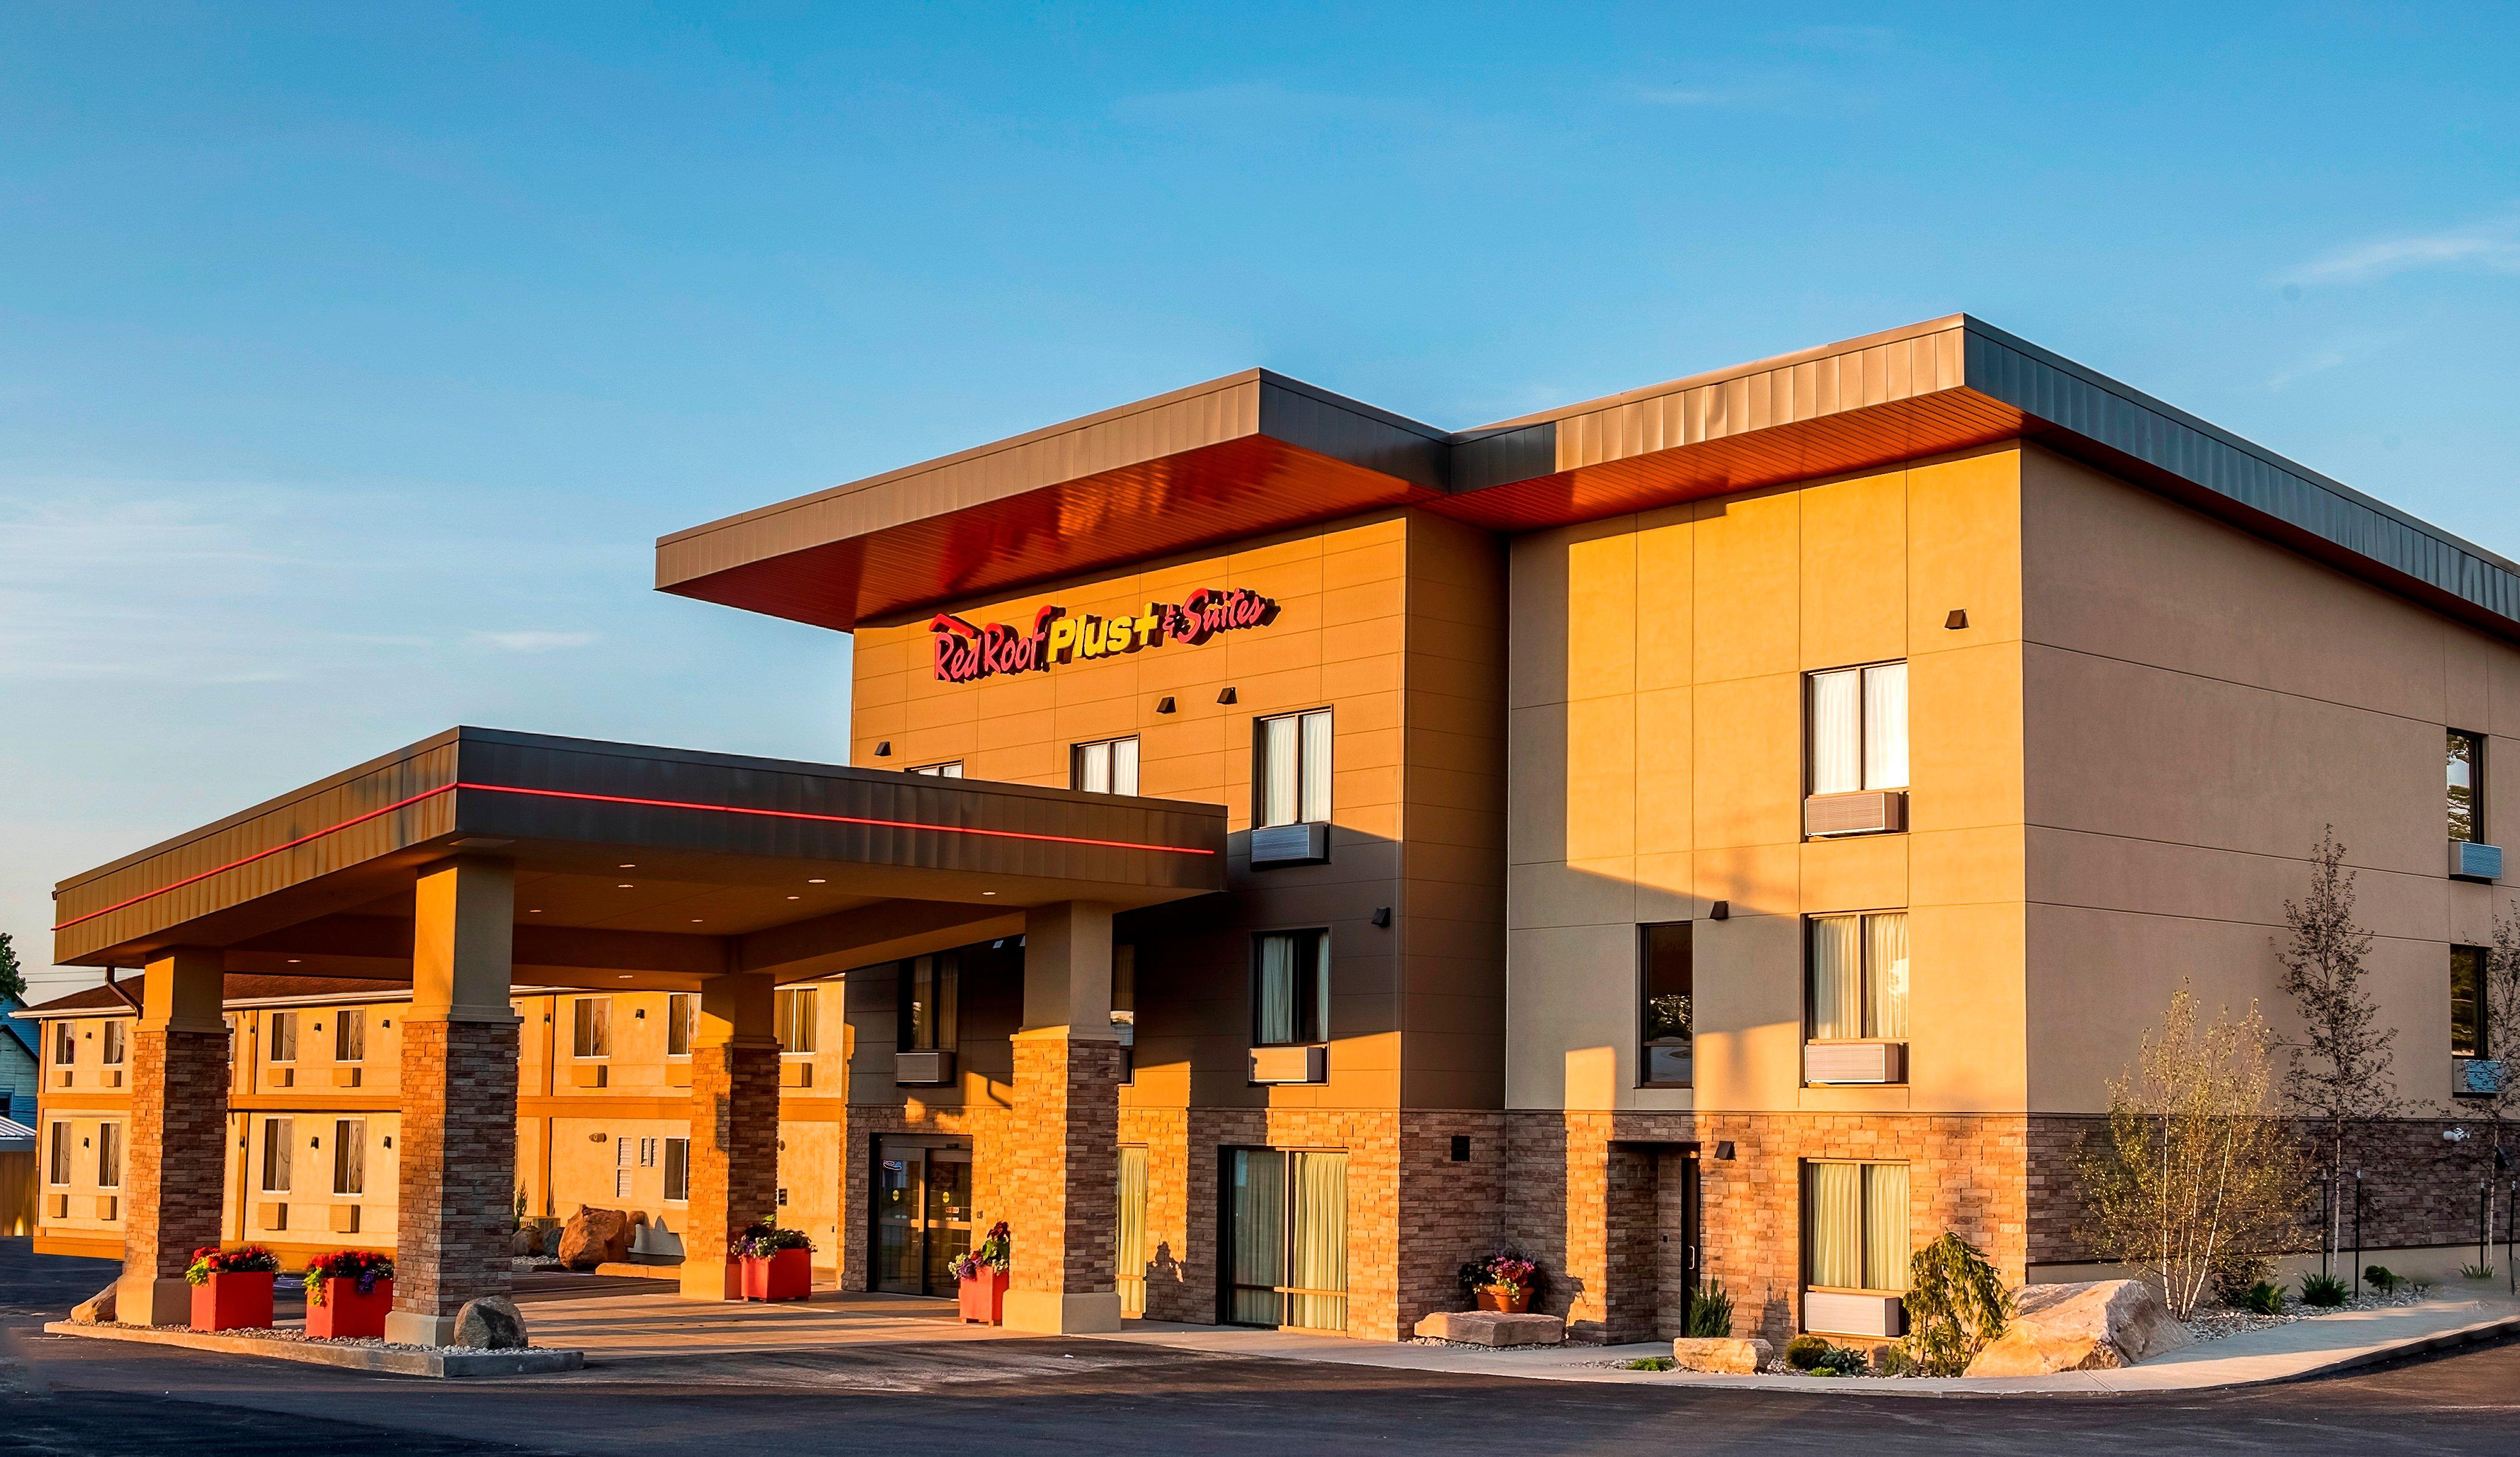 Red Roof Inn Plus+ & Suites Malone Exterior photo